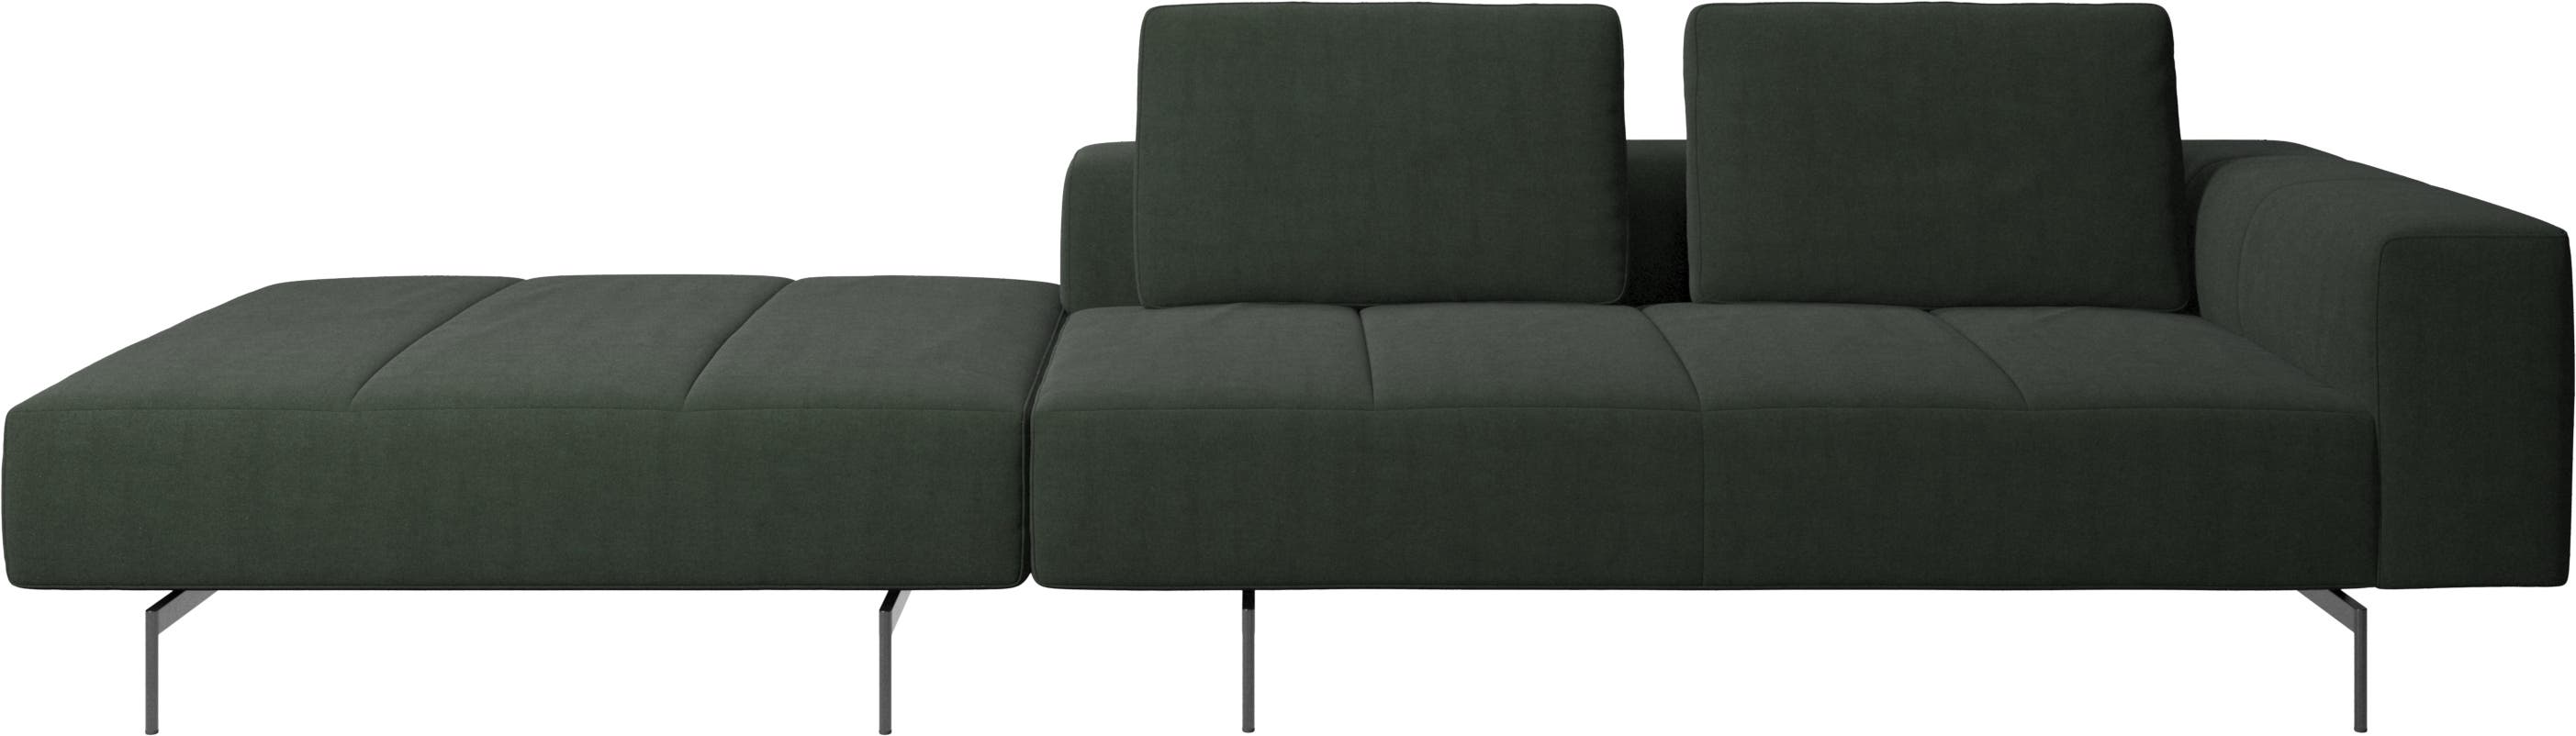 Amsterdam sofa with pouf on right side